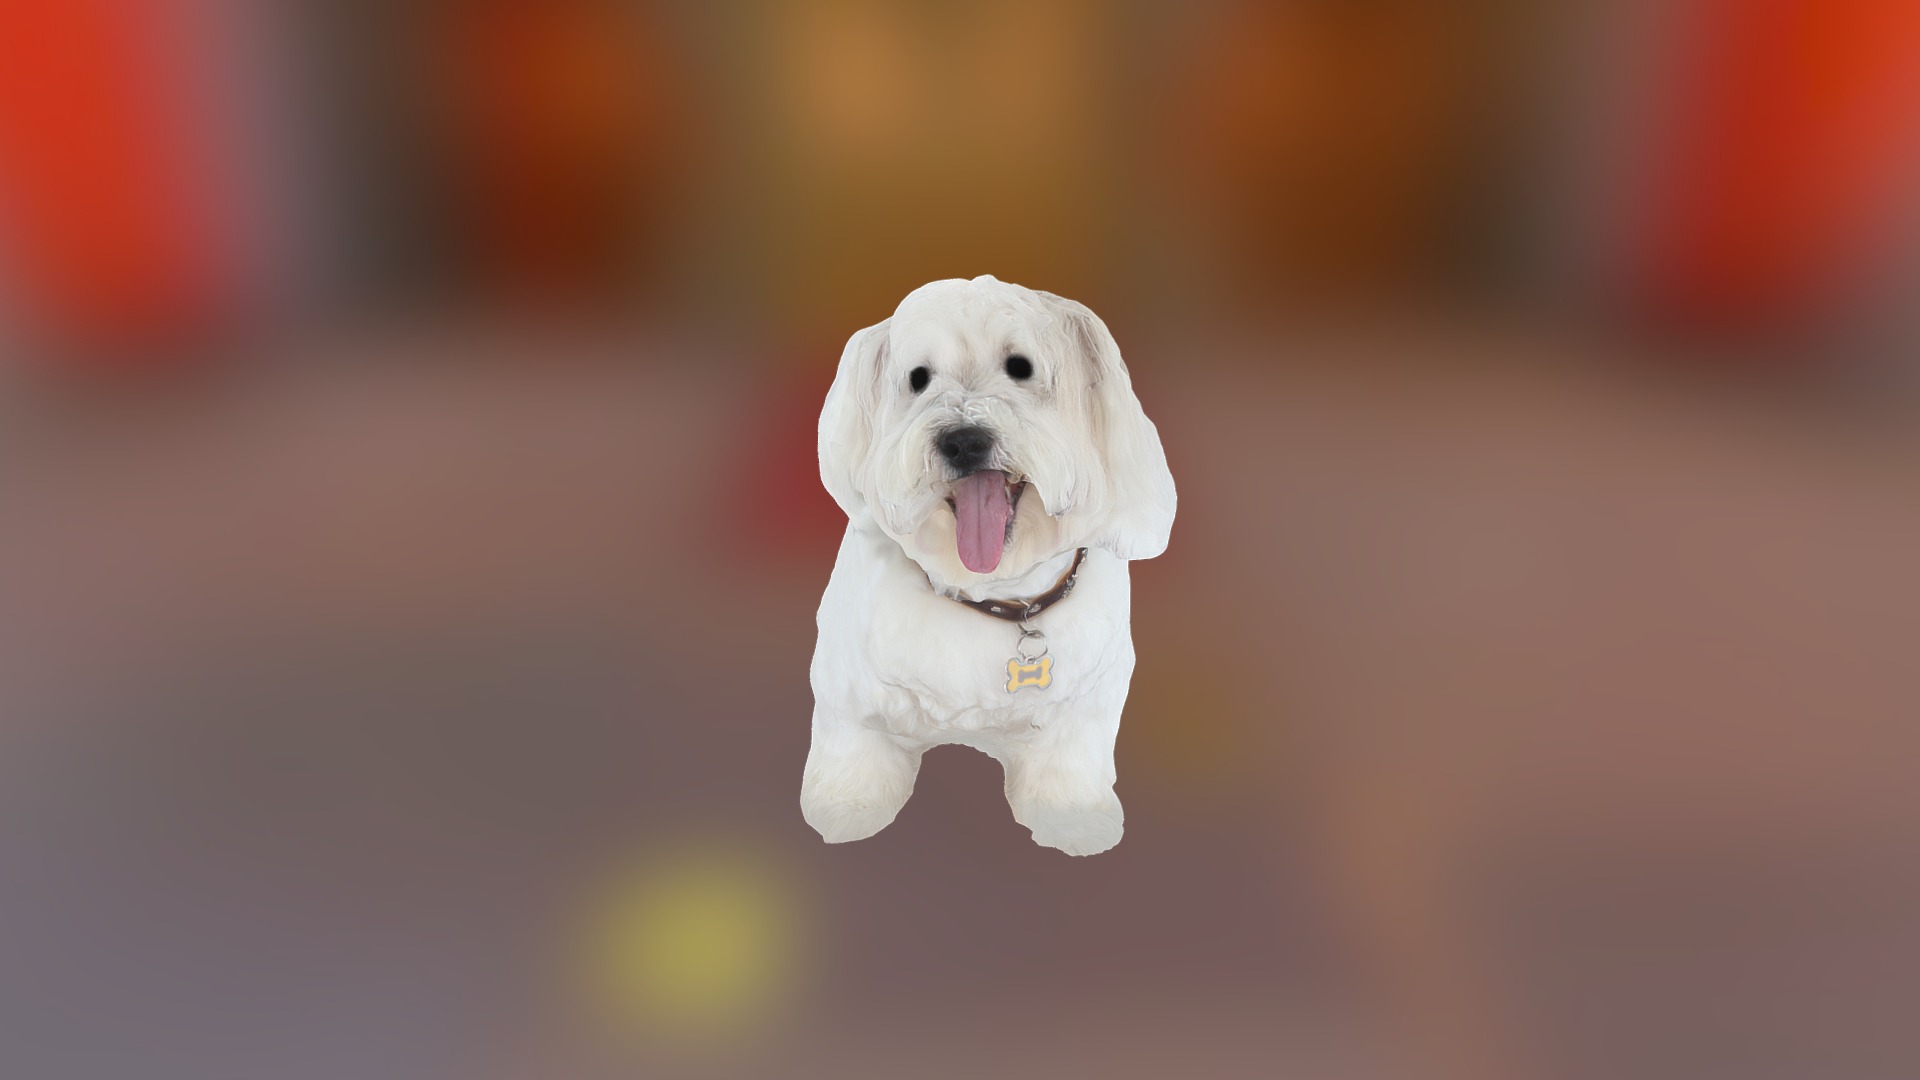 3D model Puppy - This is a 3D model of the Puppy. The 3D model is about a white dog with its tongue out.